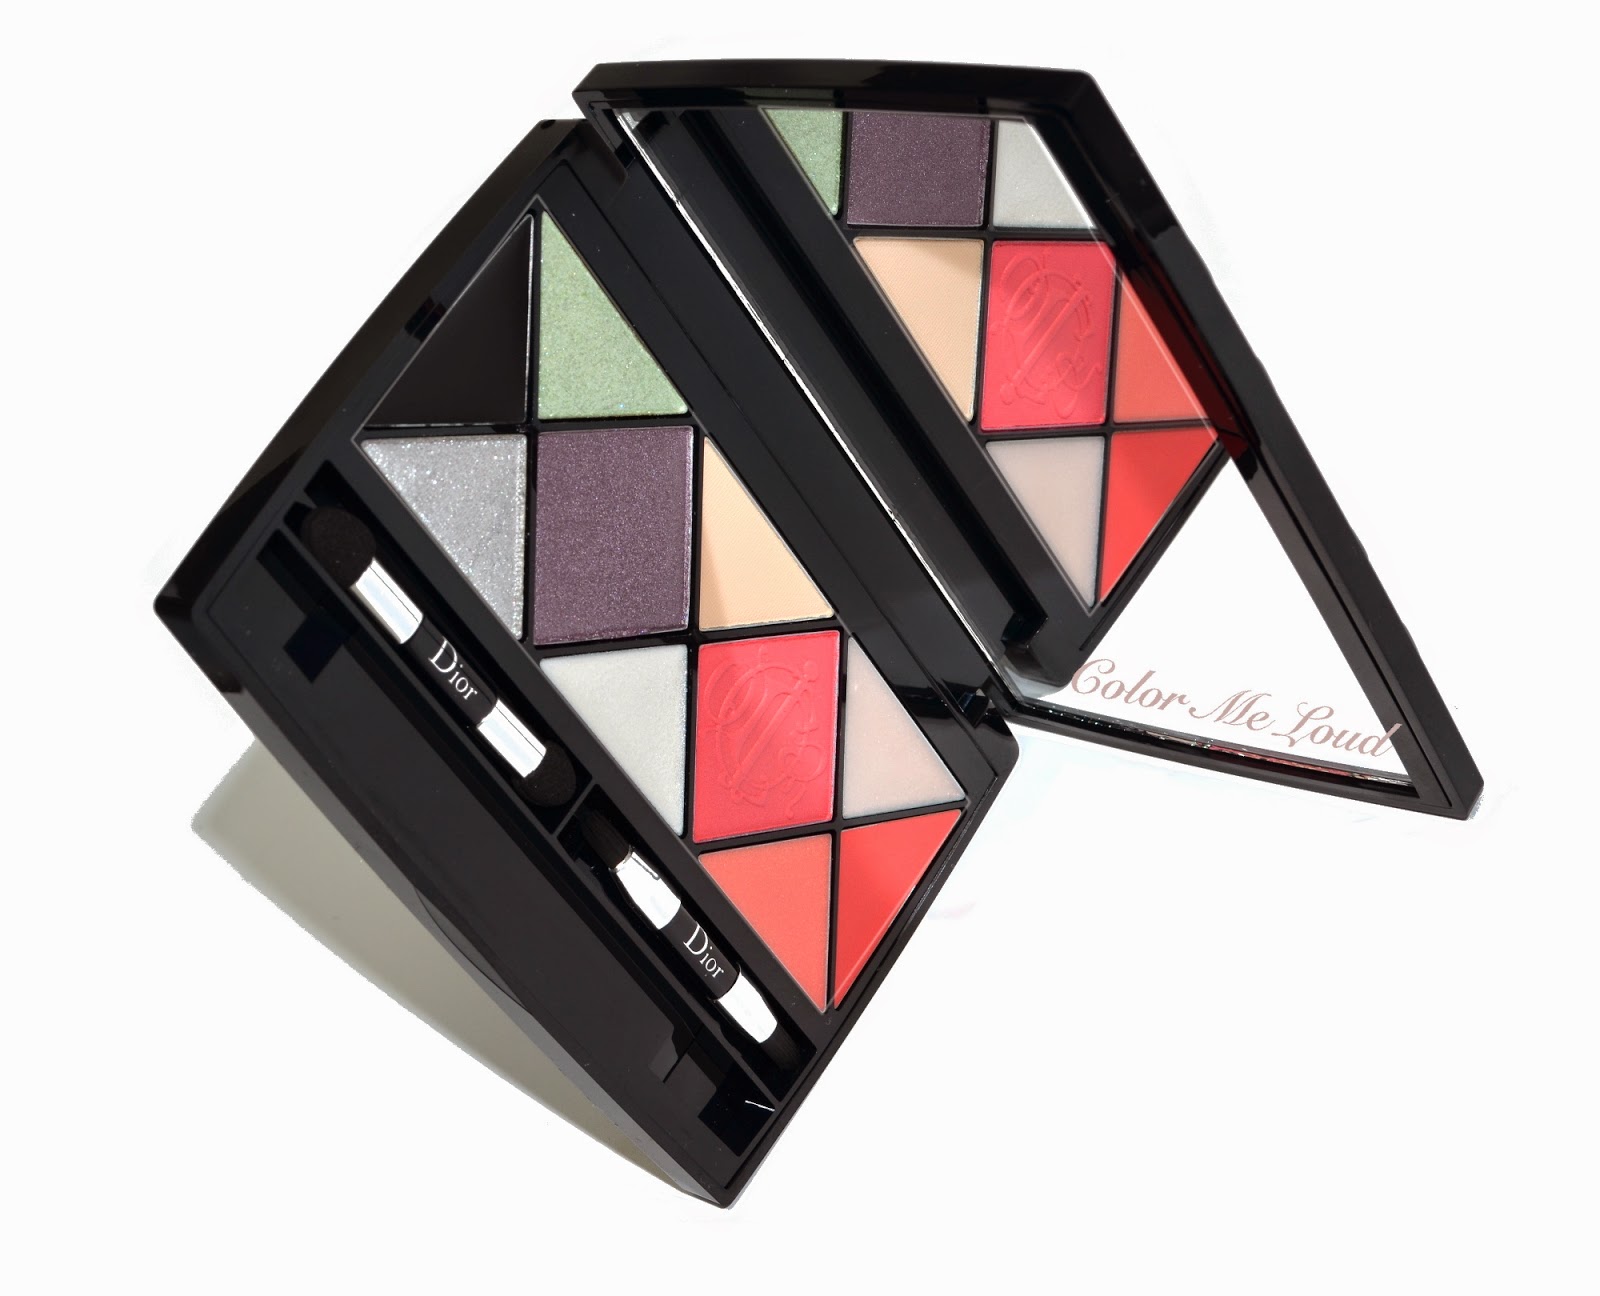 Dior Kingdom of Colors Palette for Face, Eyes and Lips